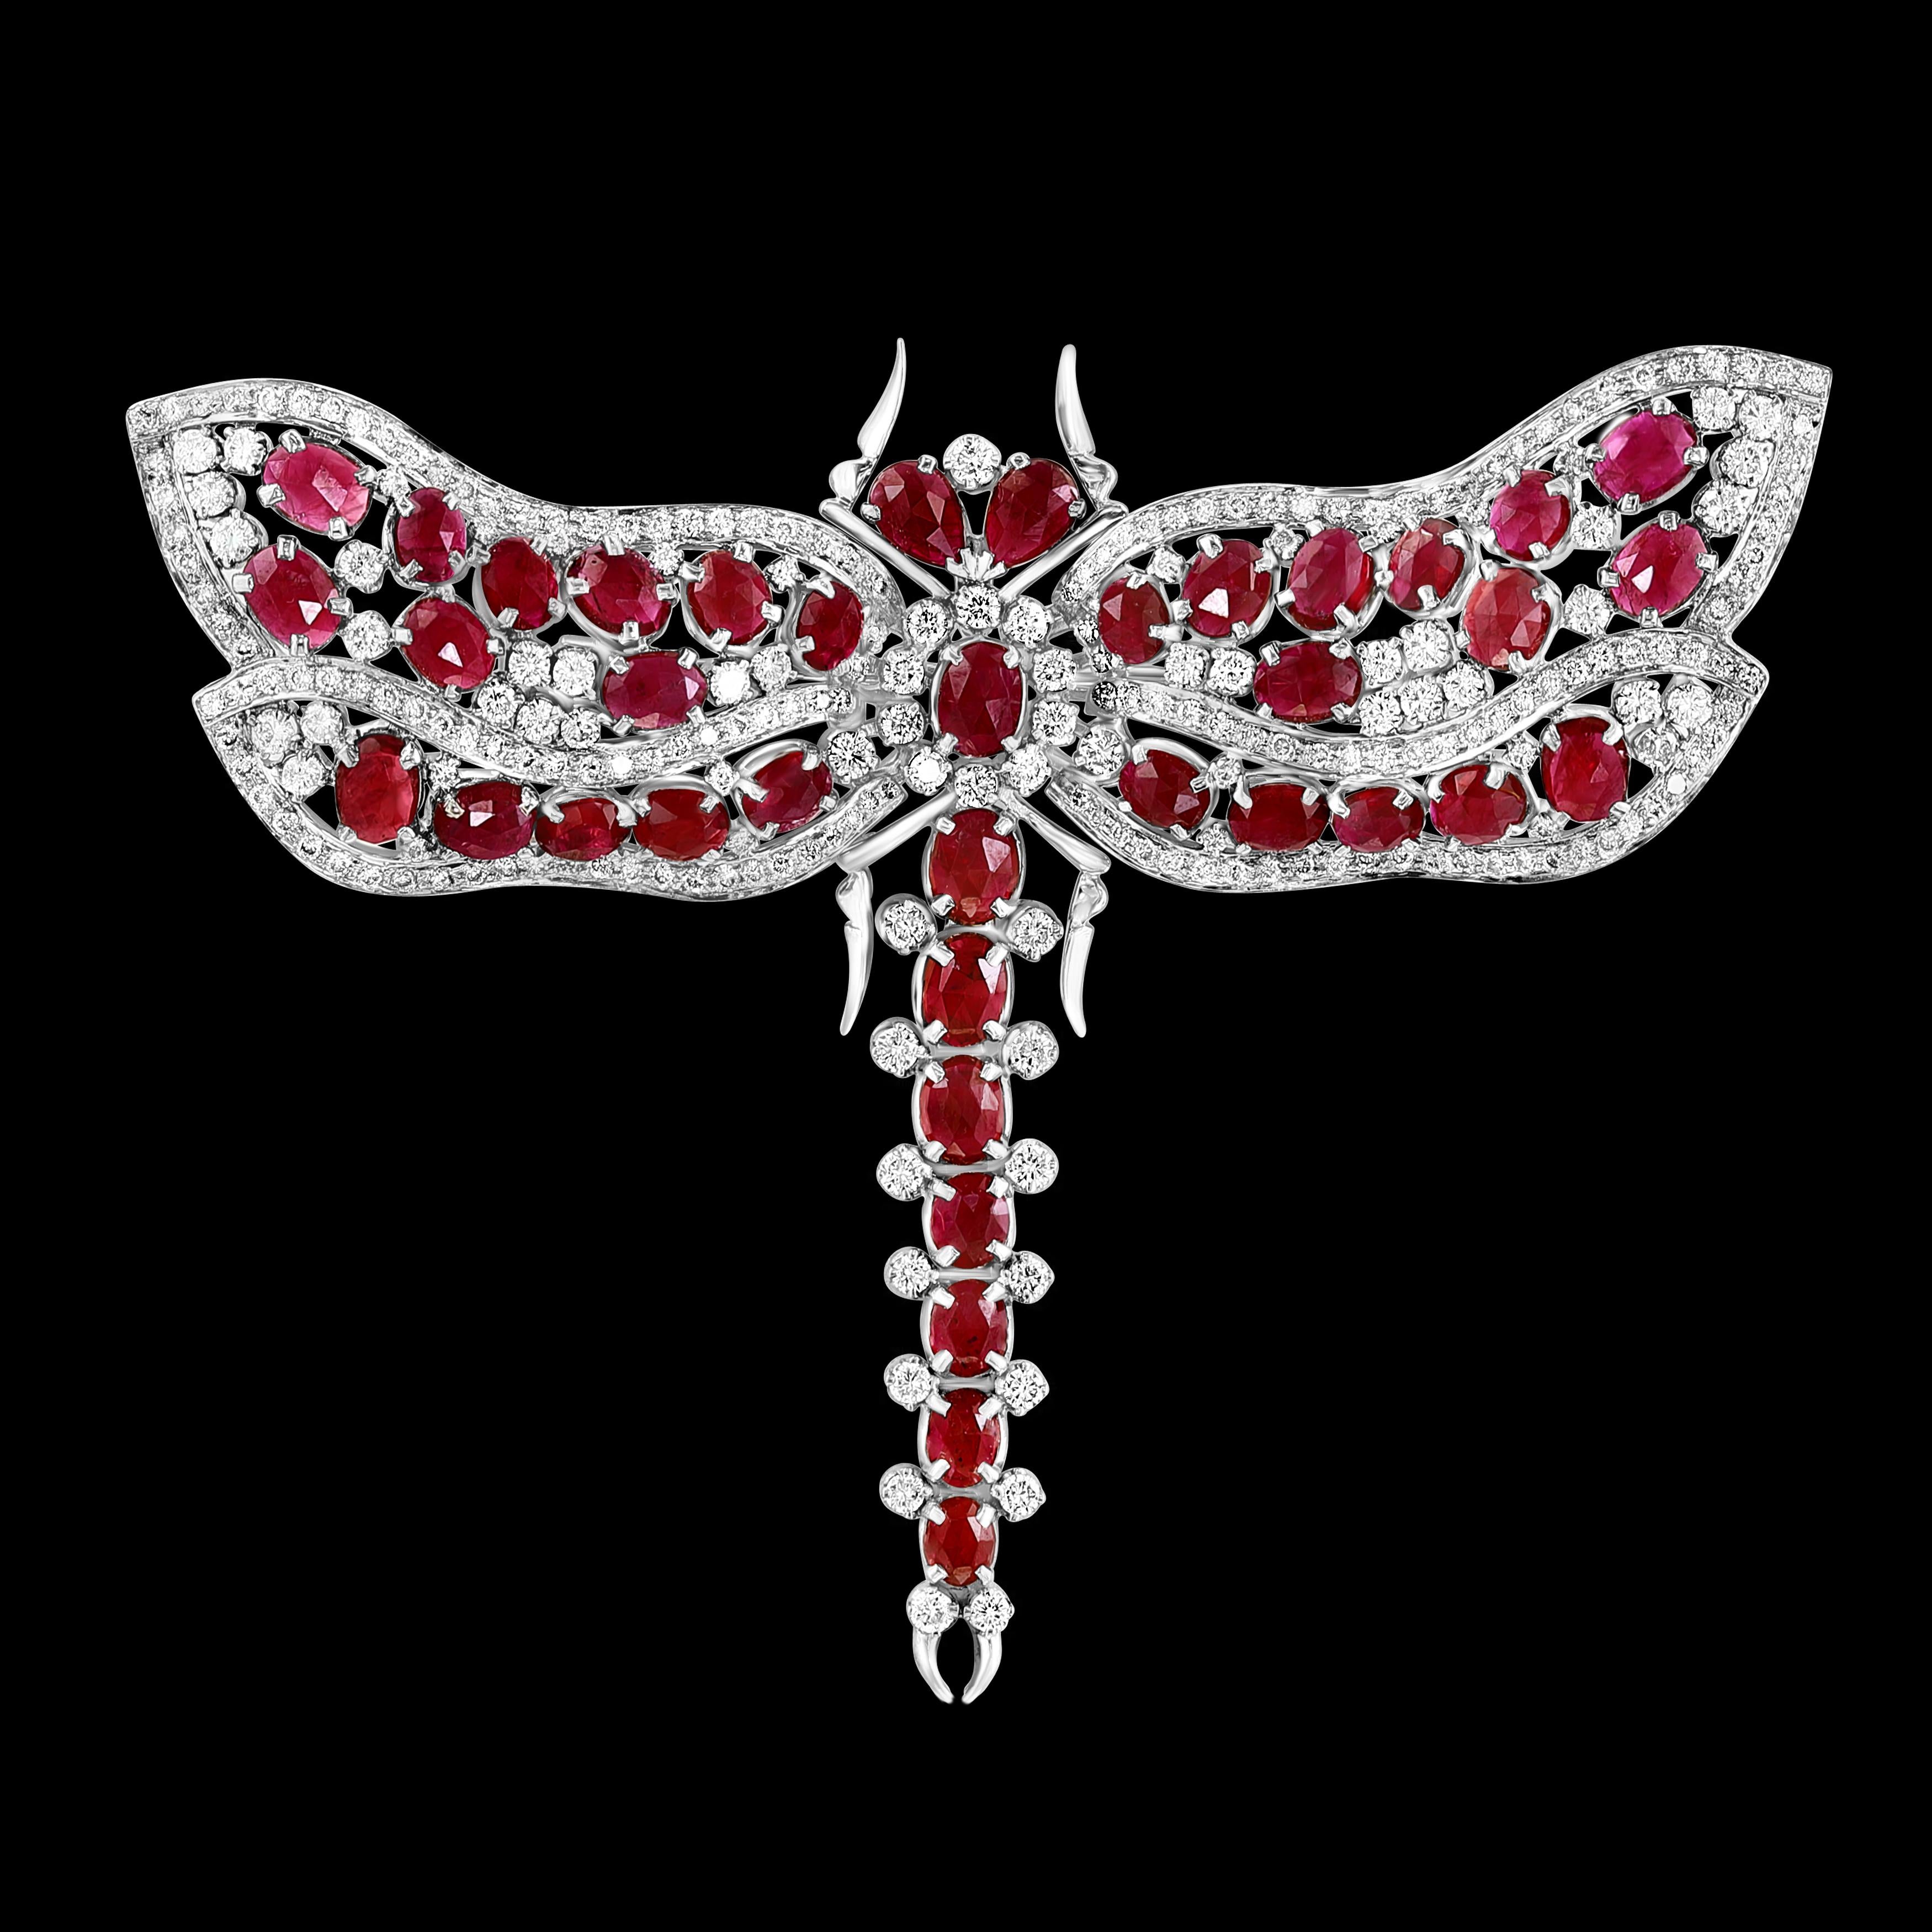 Natural 20 Ct Burma Ruby & 10 Ct Diamond Butterfly 18 Kt White Gold Pin/Brooch For Sale 2